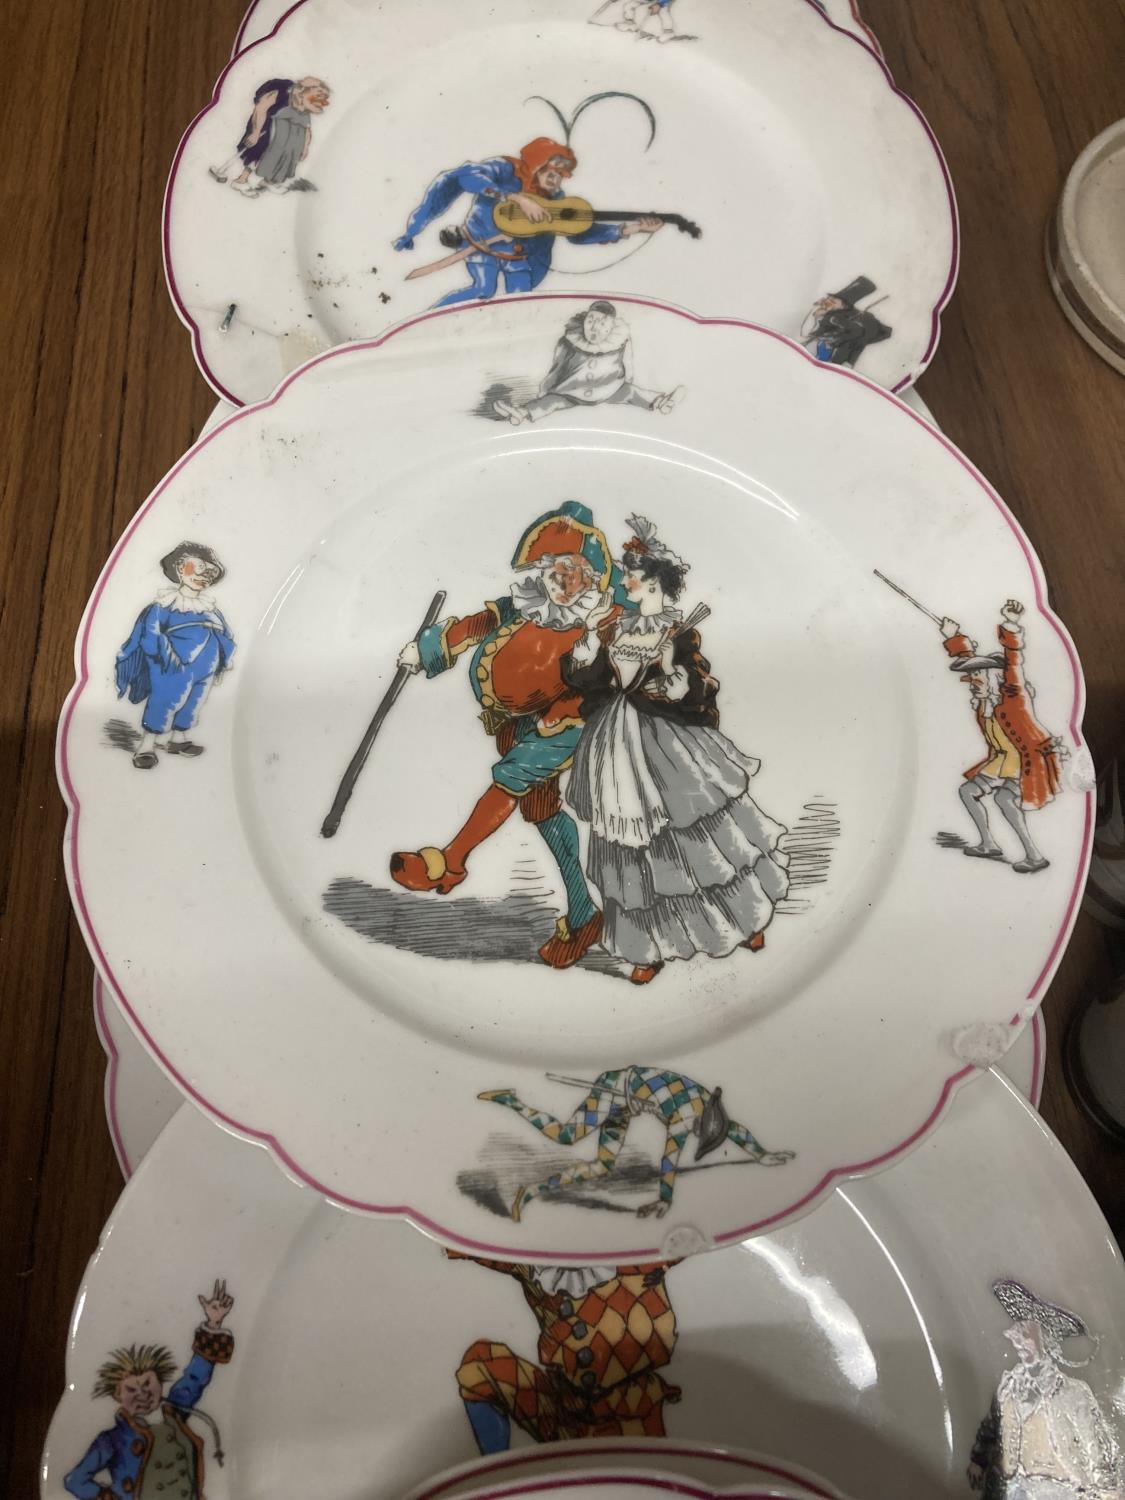 A COLLECTION OF VINTAGE PLATES WITH IMAGES OF COMICAL JESTER SCENES - Image 2 of 4